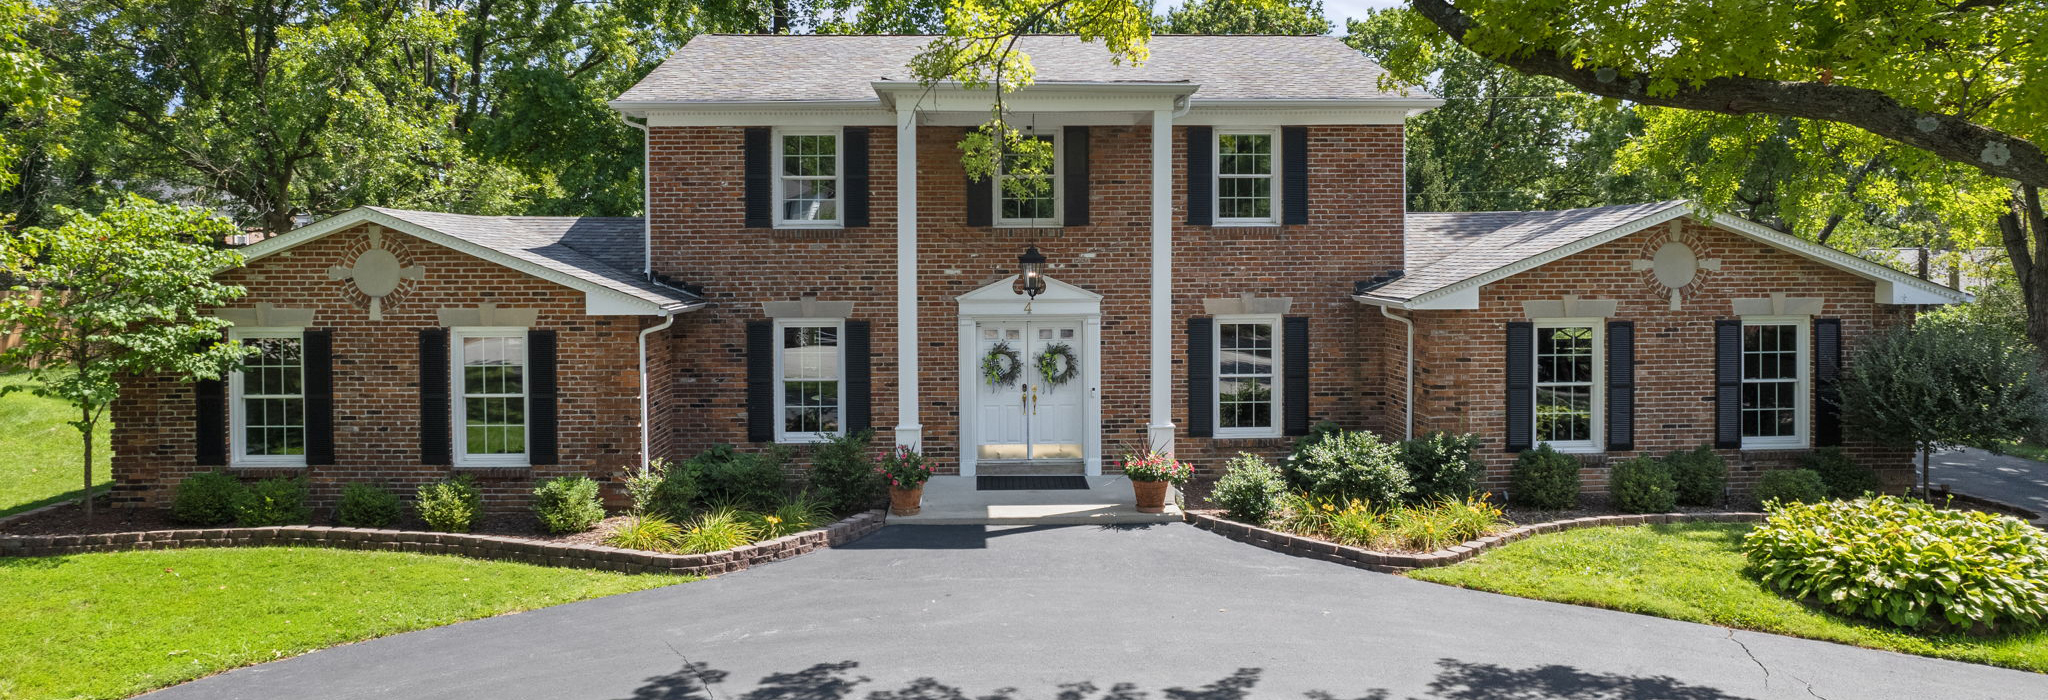 4 Suffield Place | Stunning 2-Story Brick Home